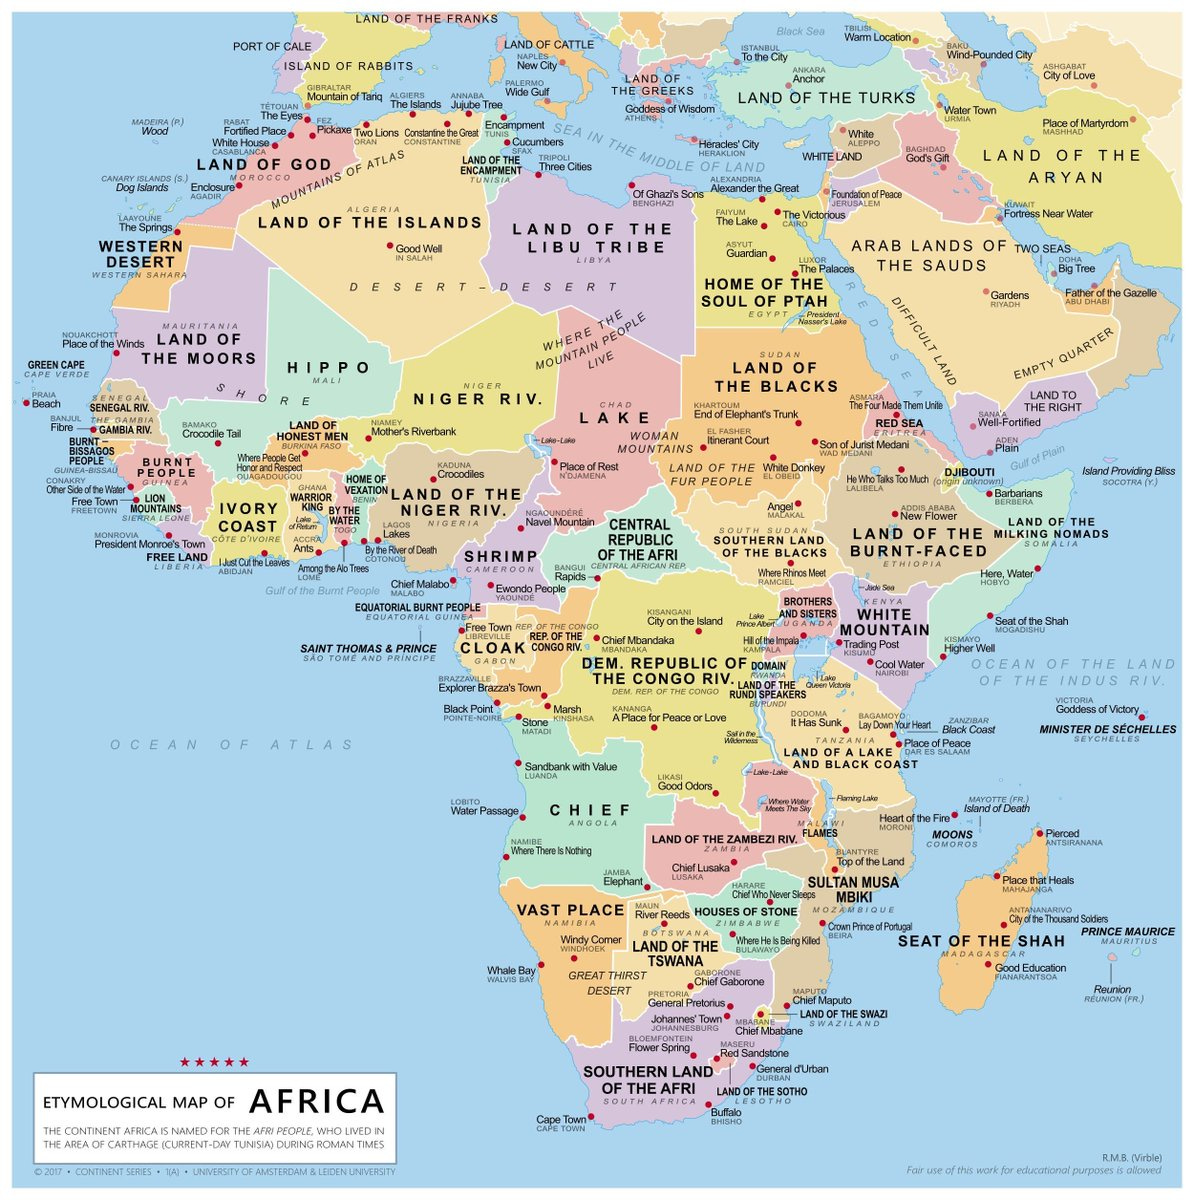 A map showing the literal meanings of the names of African countries